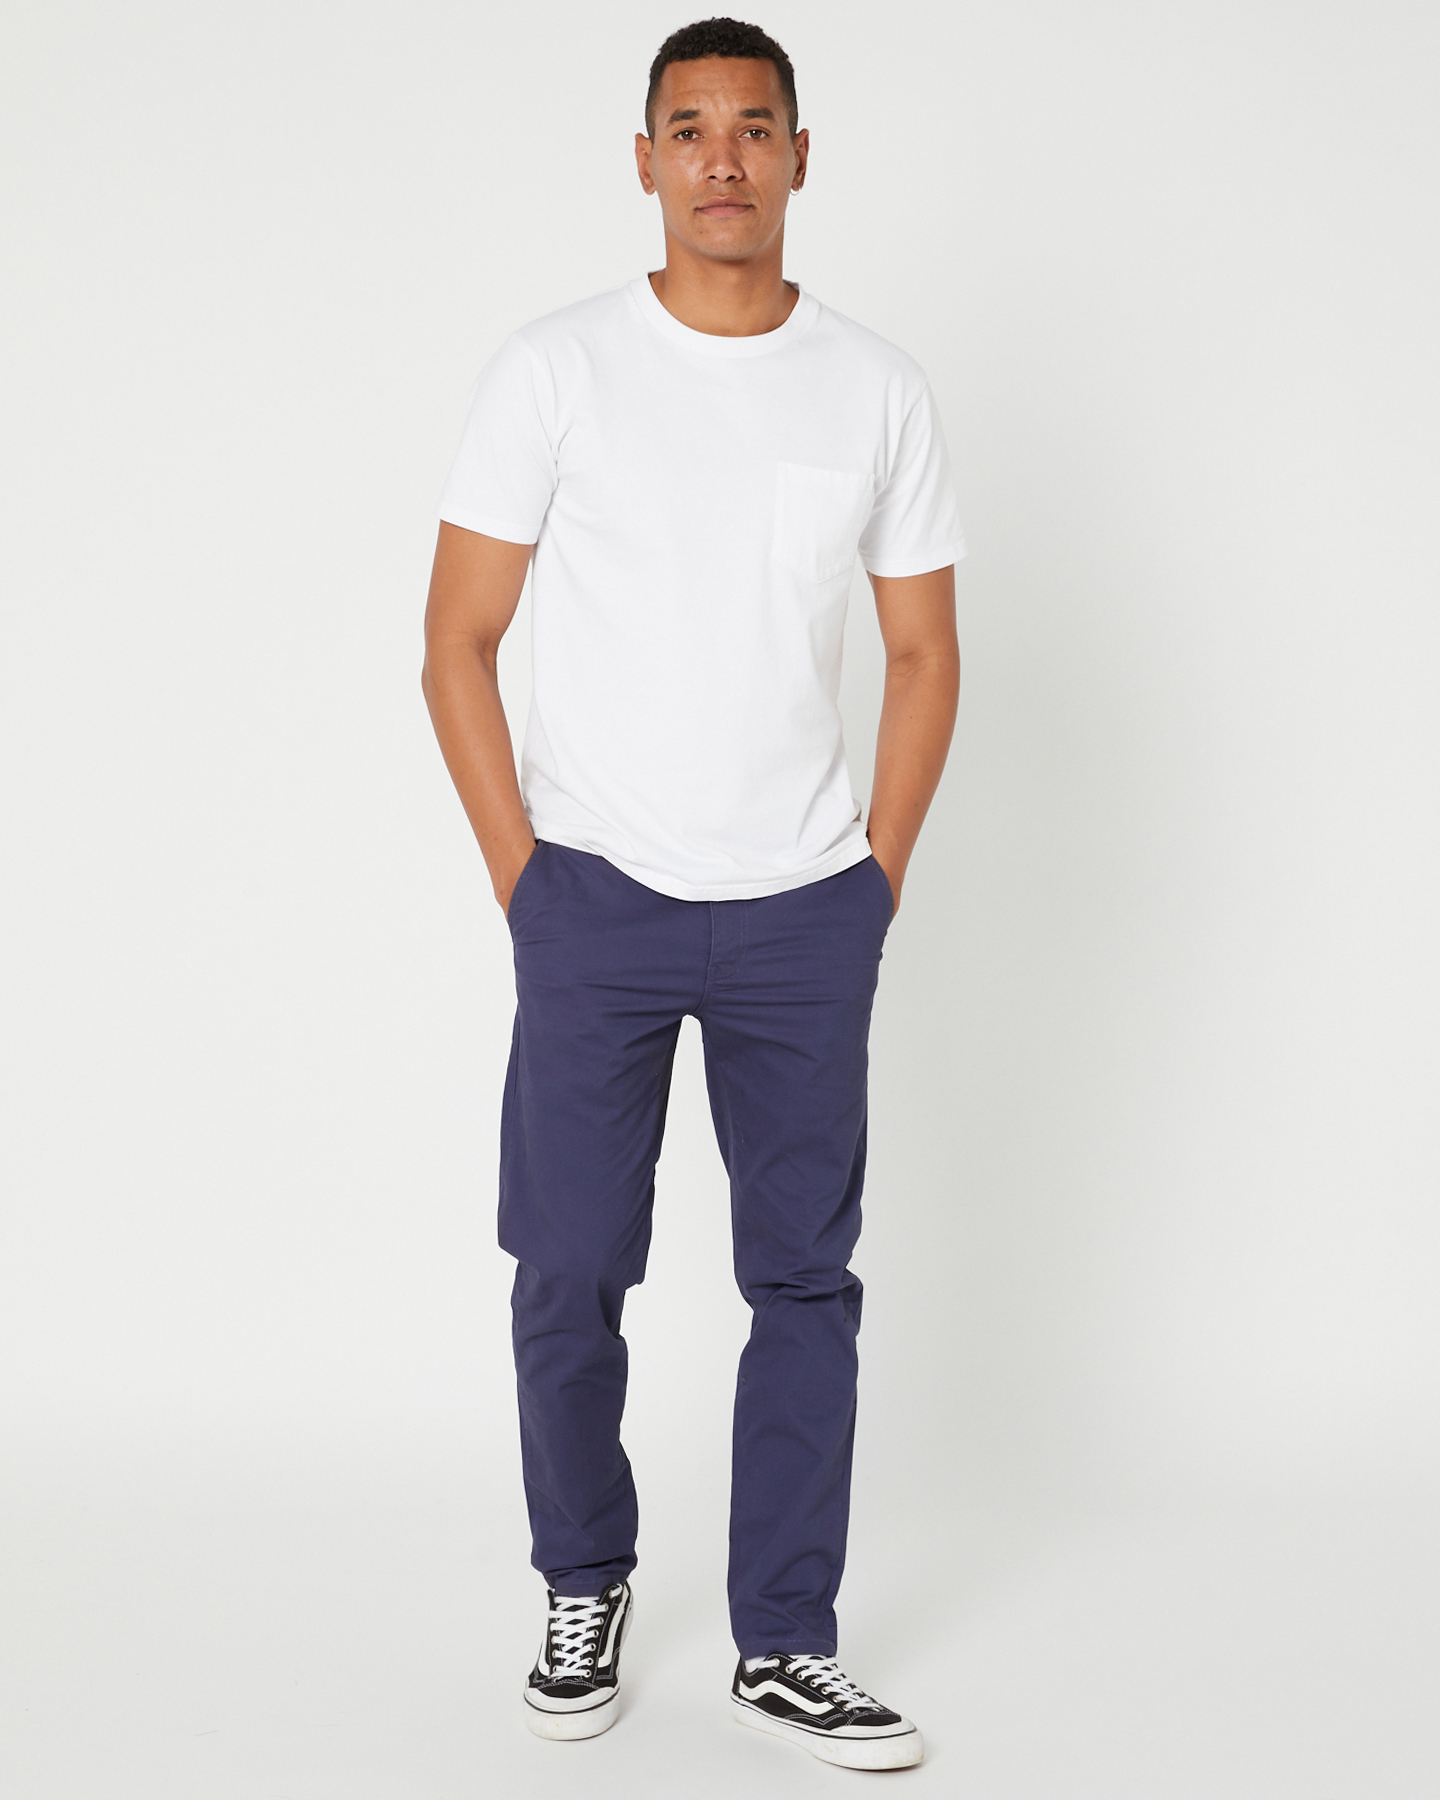 Swell Tempest Chino Pant - Navy Steel | SurfStitch